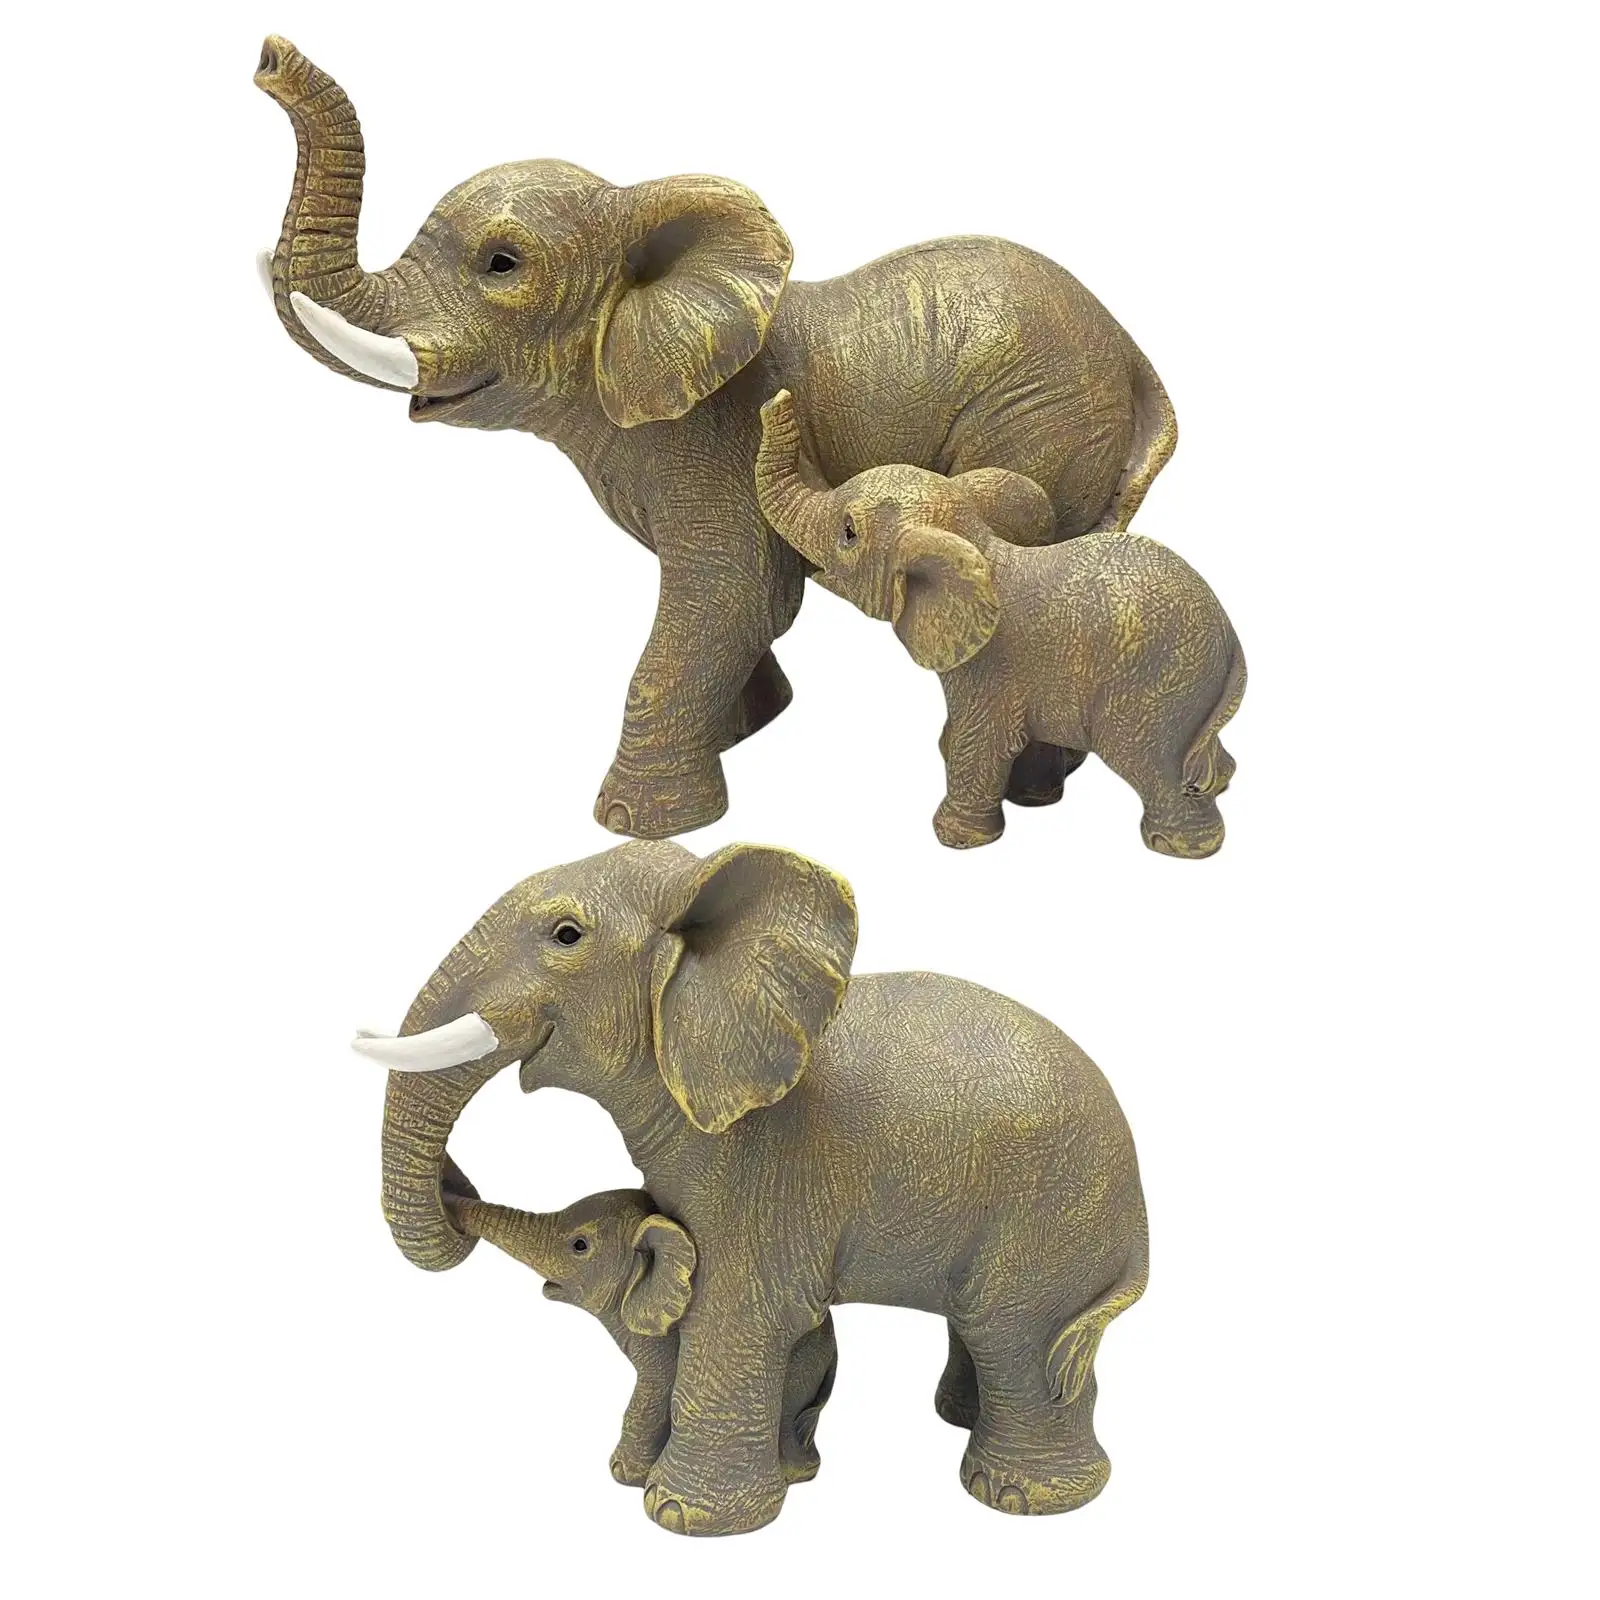 Lover Resin Figurines Sculptures Art Works Collectible Decorative Elephant Statues for   Wine  Sill Home Office